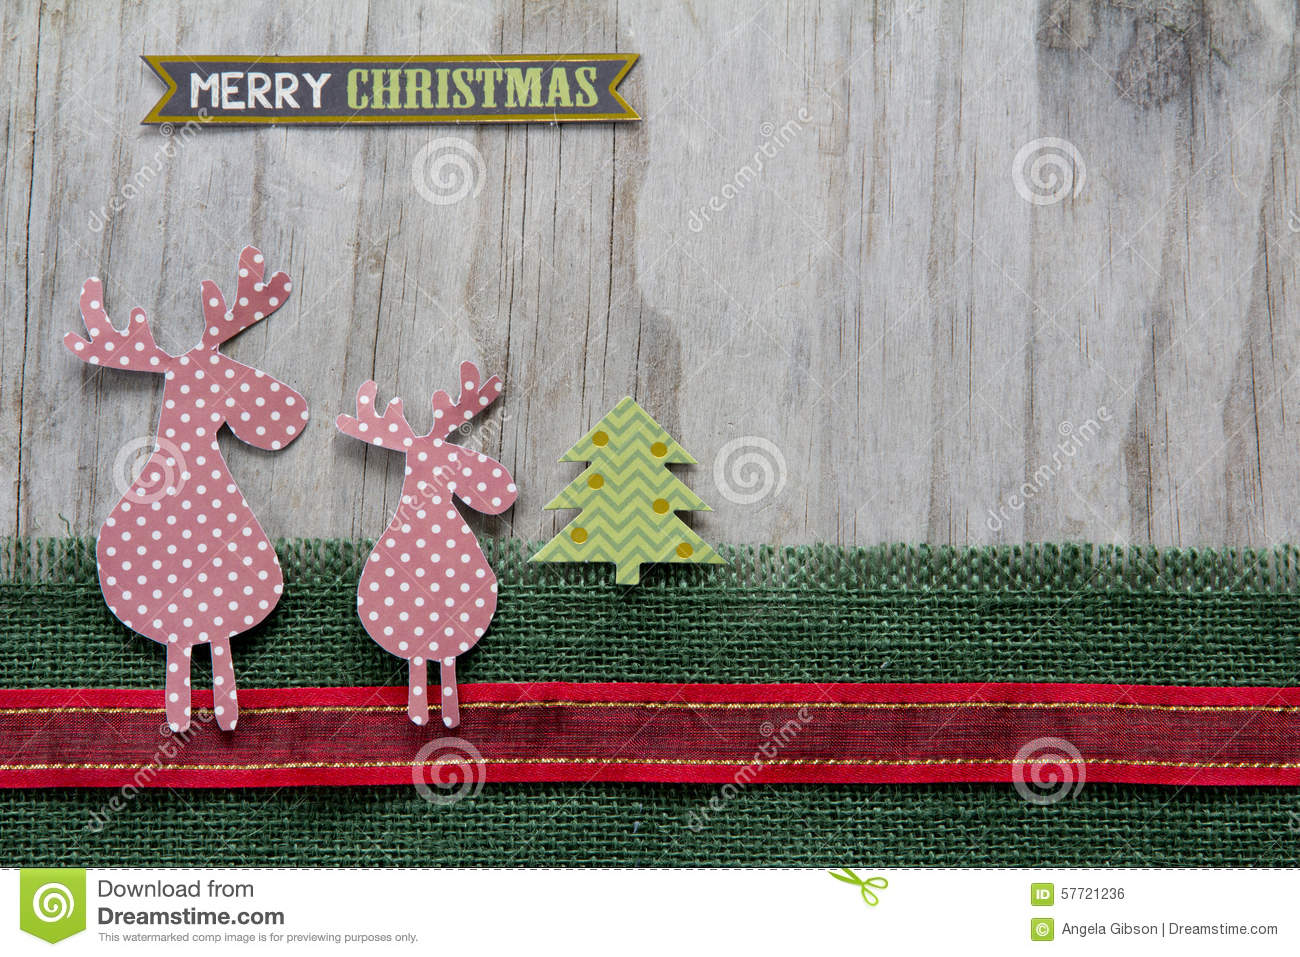 Rustic Merry Christmas Card With Reindeer Tree And Snowflakes On Red    